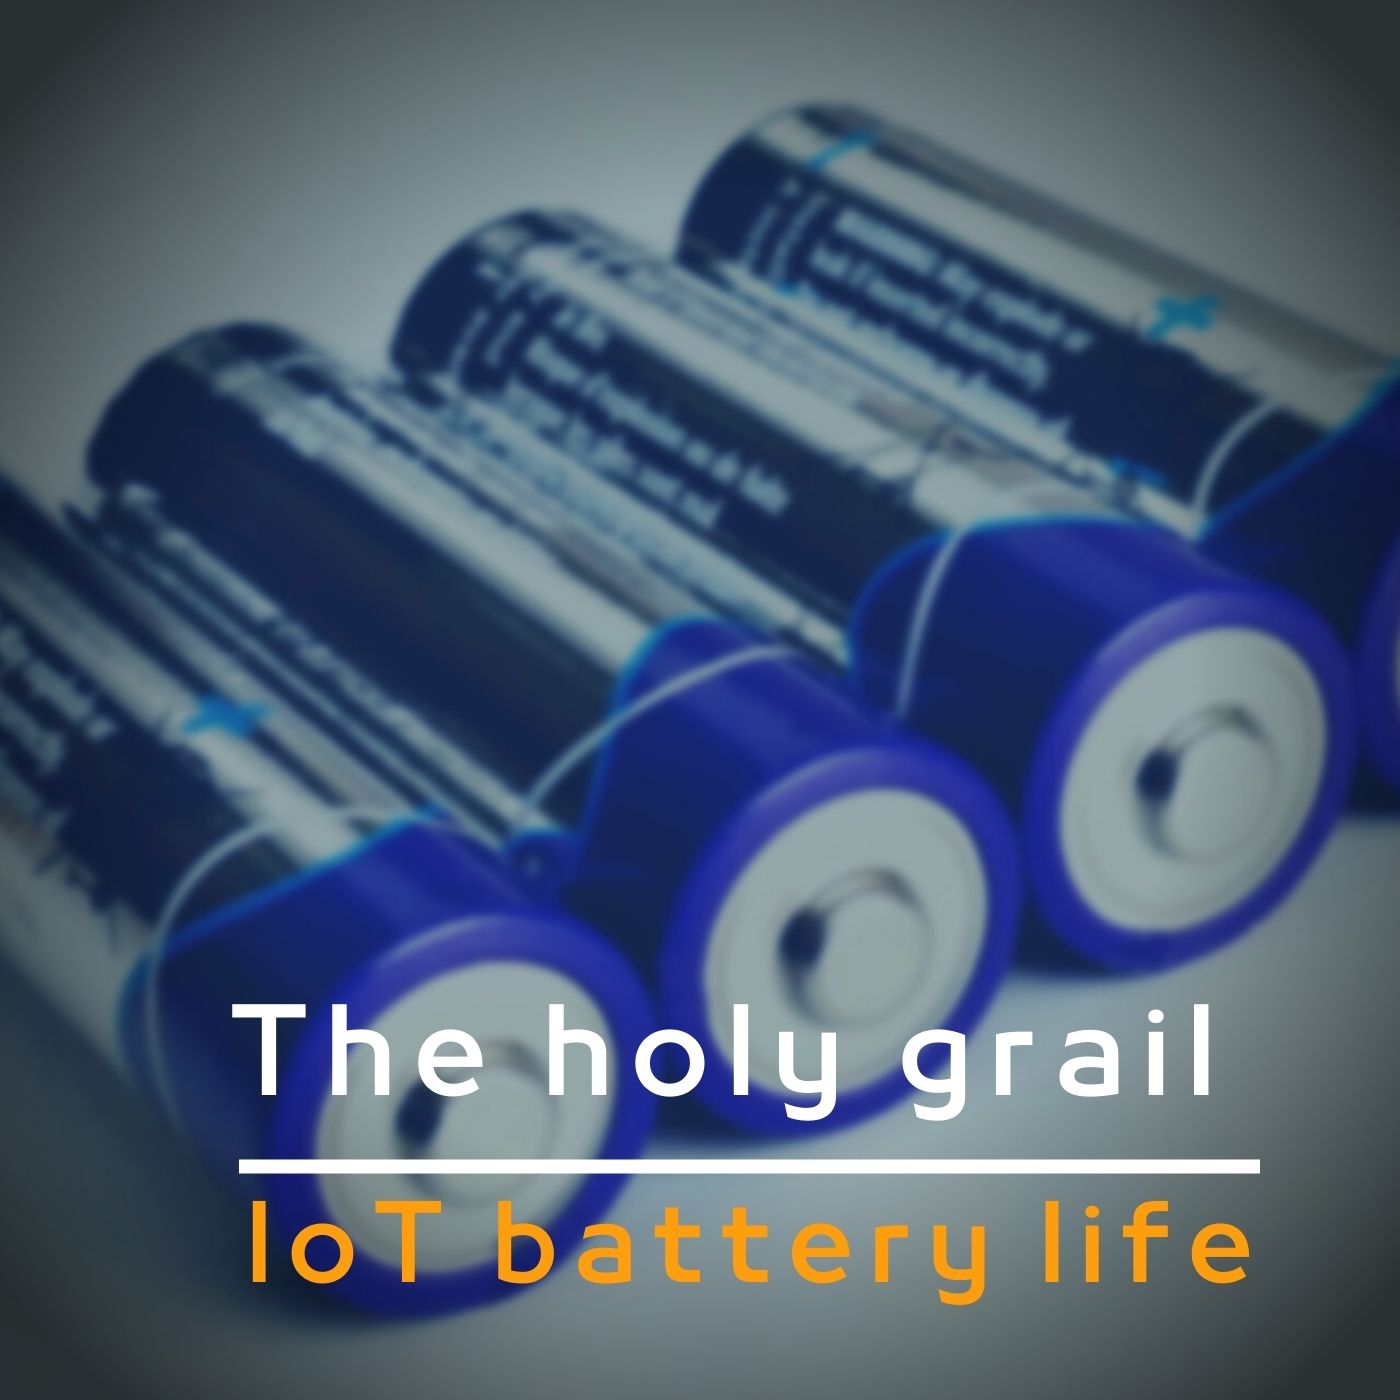 Battery life the holy grail of IoT